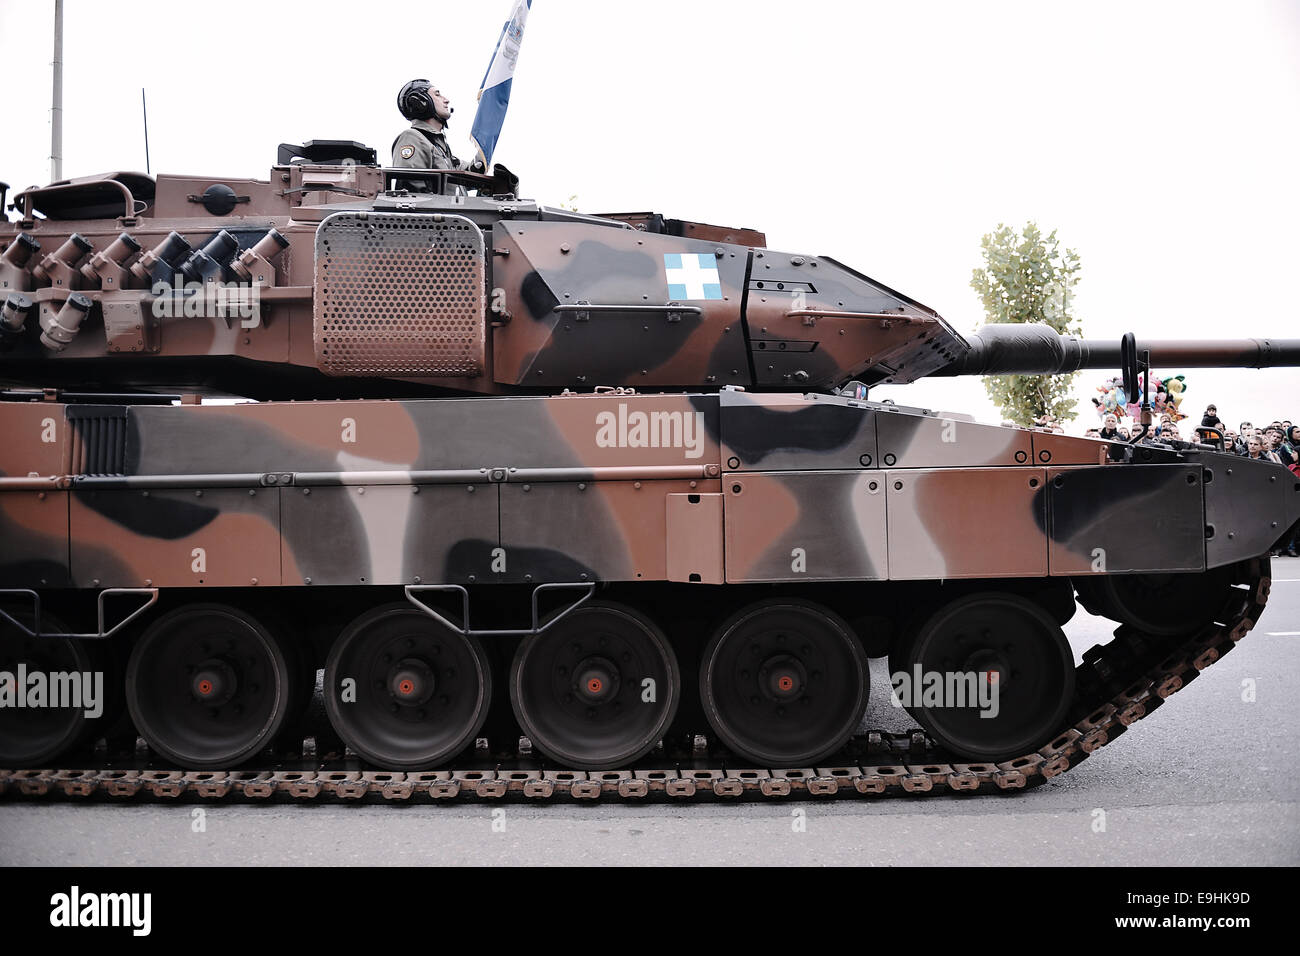 Thessaloniki, Greece. 28th October, 2014. A Leopard 2 HEL tank during the military parade that was held in Thessaloniki during the celebrations of the 28th of October anniversary, the date that Greece entered the World War II in 1940. Credit:  Giannis Papanikos/Alamy Live News Stock Photo